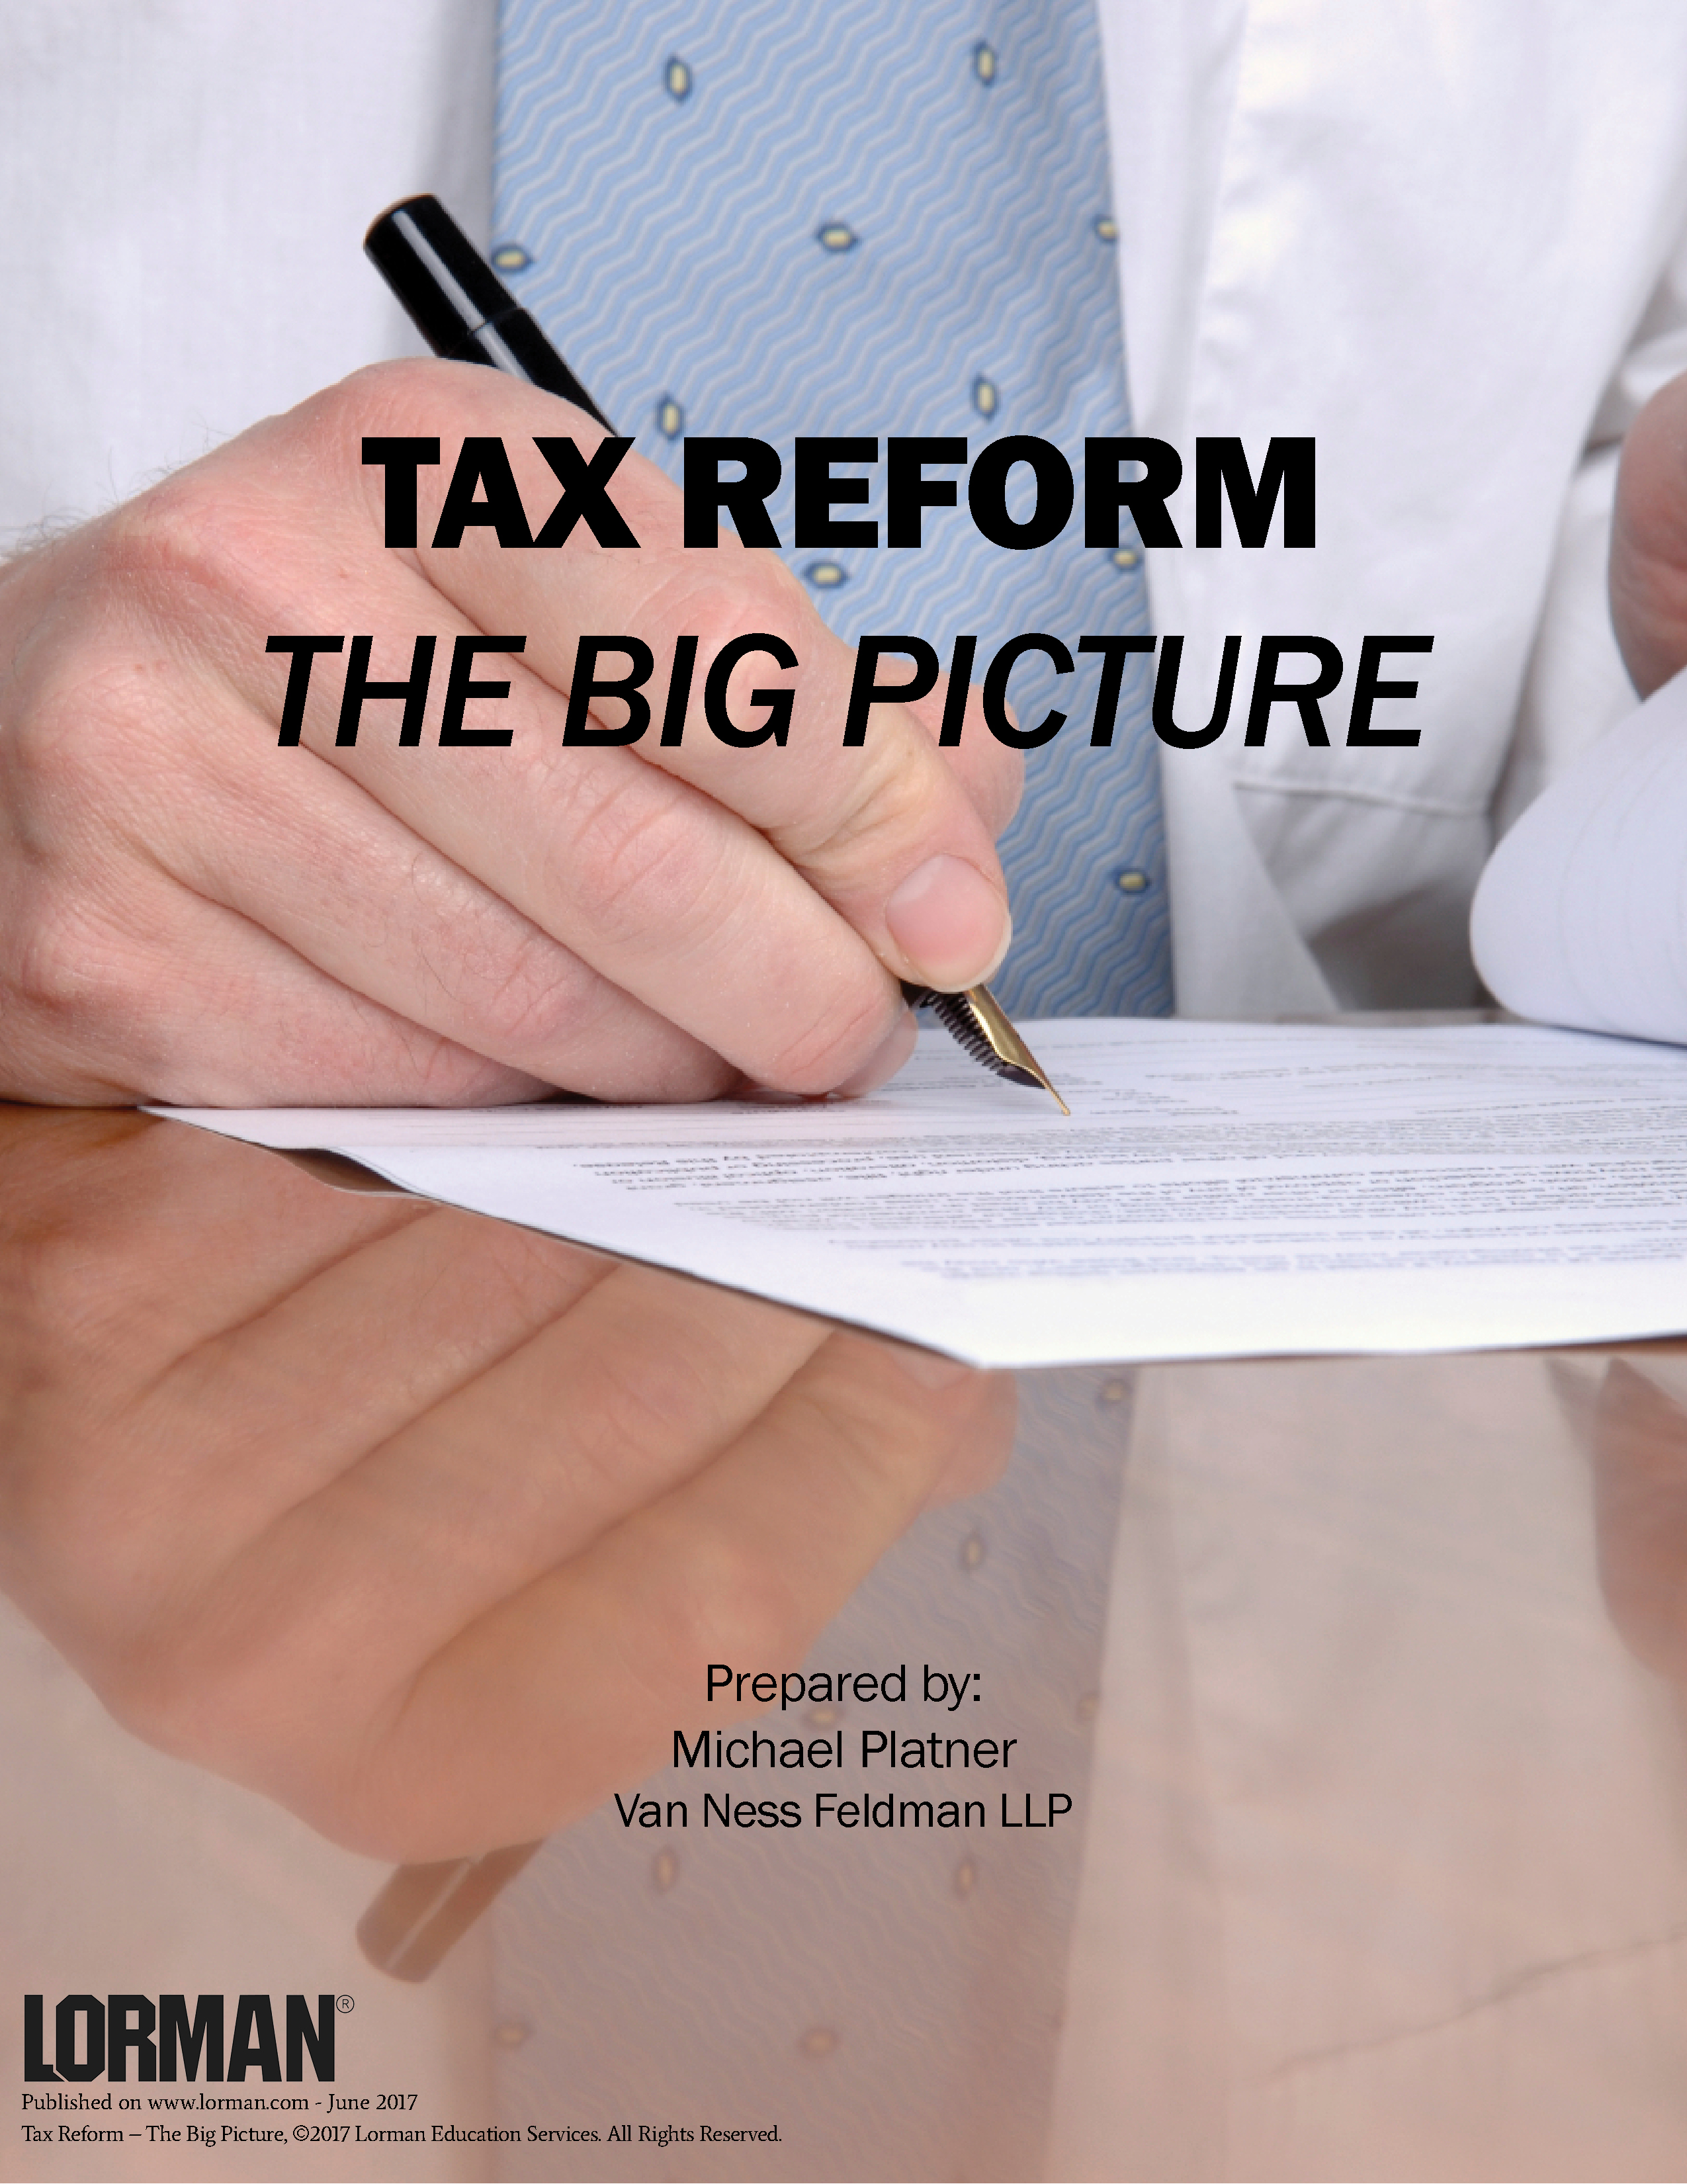 Tax Reform - The Big Picture